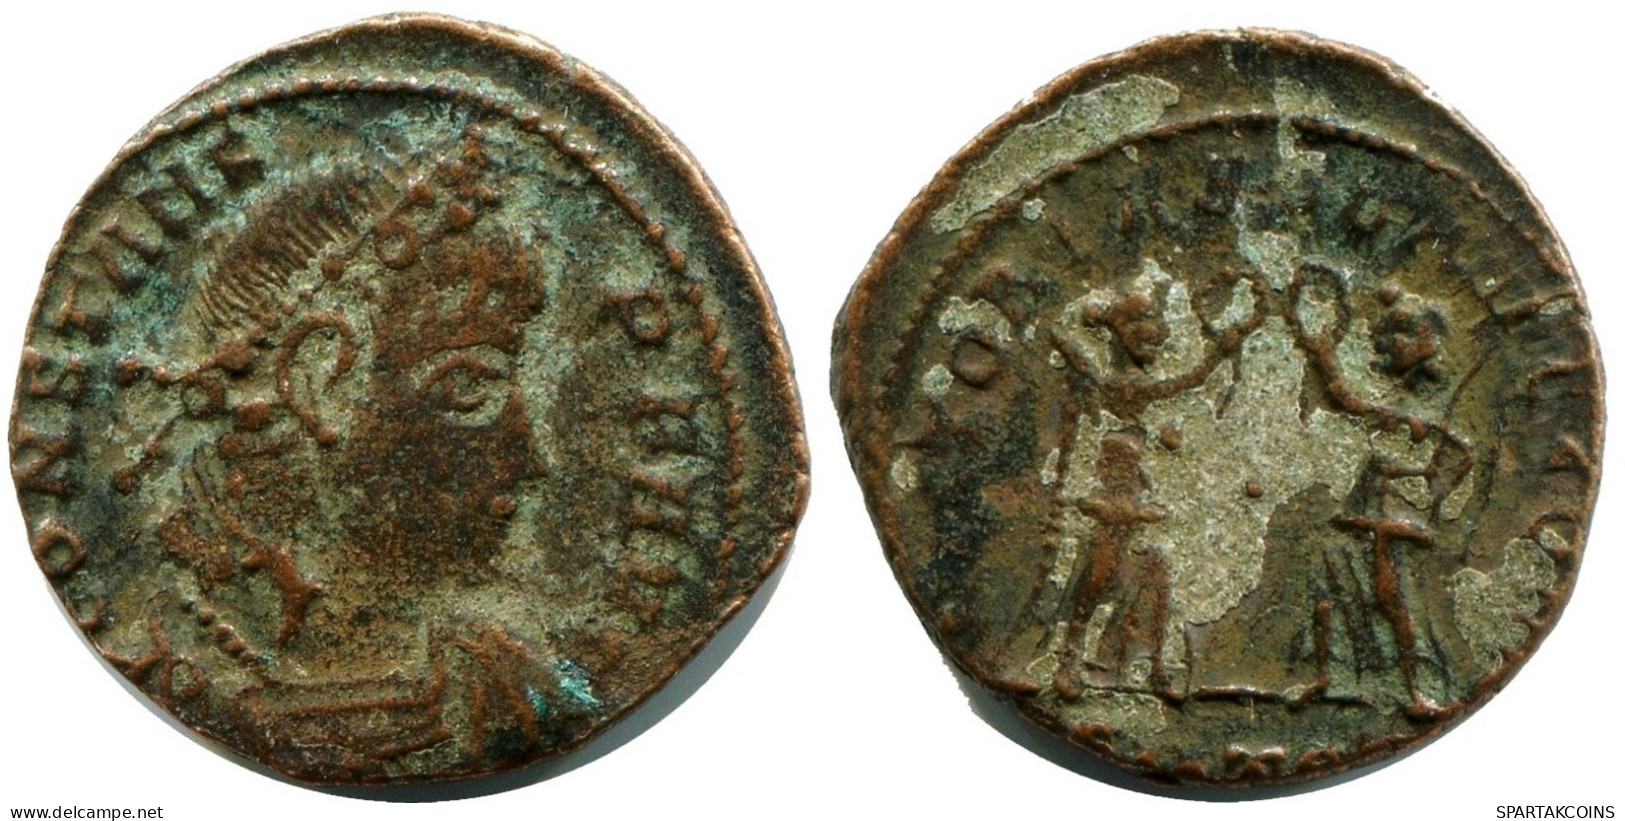 CONSTANS MINTED IN THESSALONICA FROM THE ROYAL ONTARIO MUSEUM #ANC11881.14.D.A - El Impero Christiano (307 / 363)